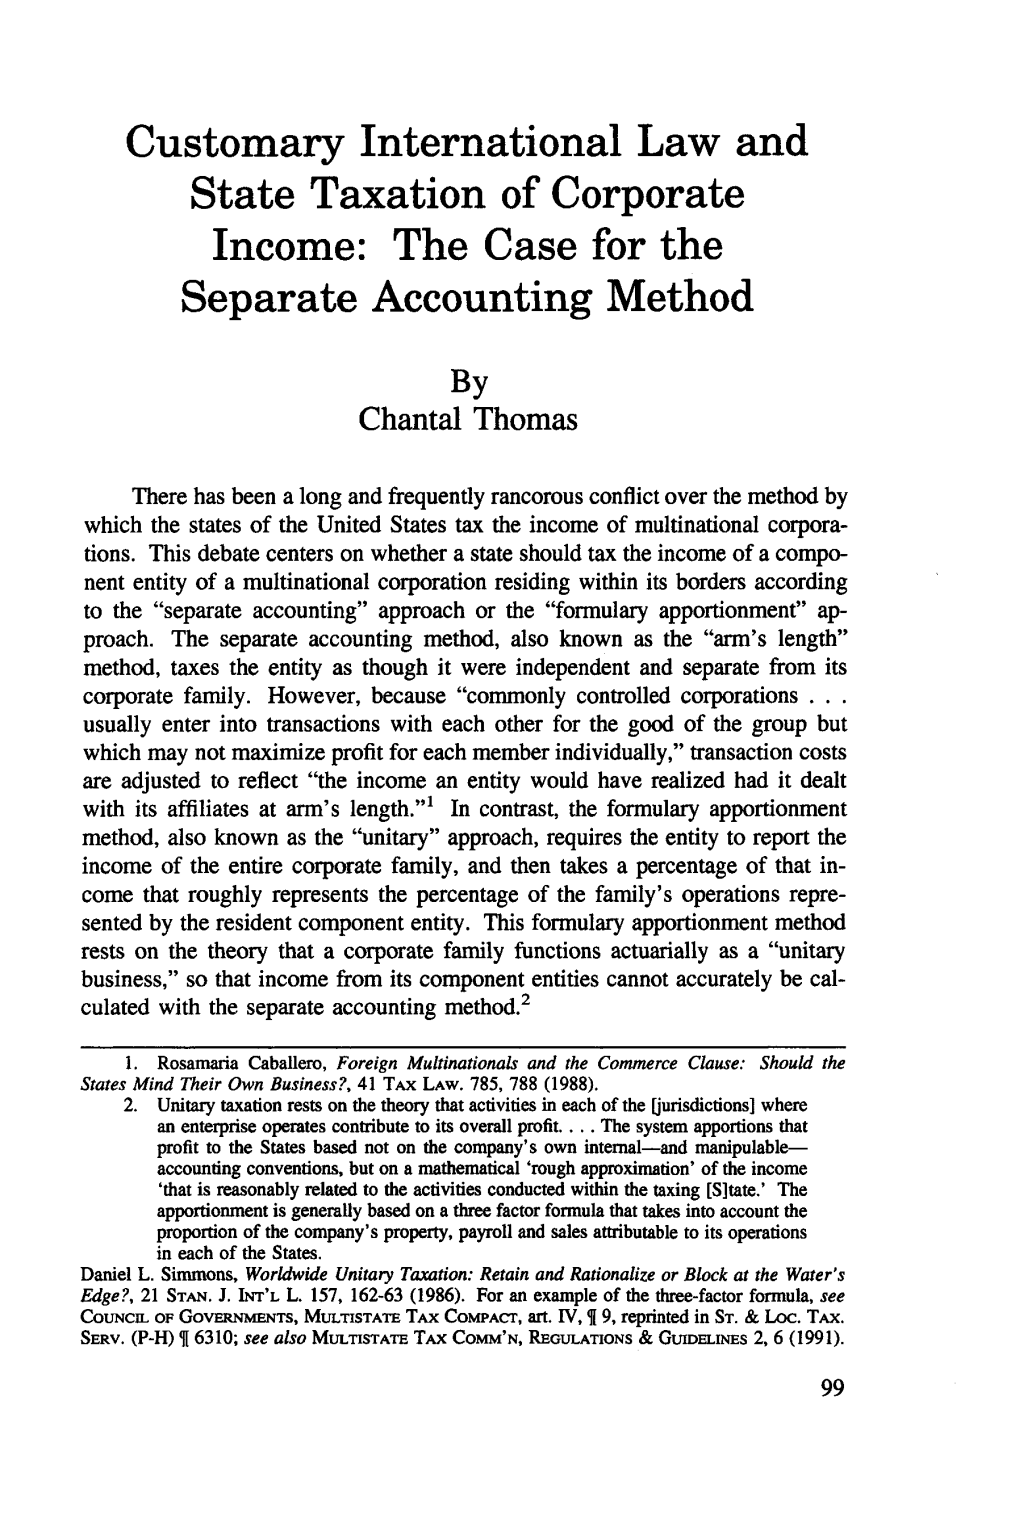 Customary International Law and State Taxation of Corporate Income: the Case for the Separate Accounting Method